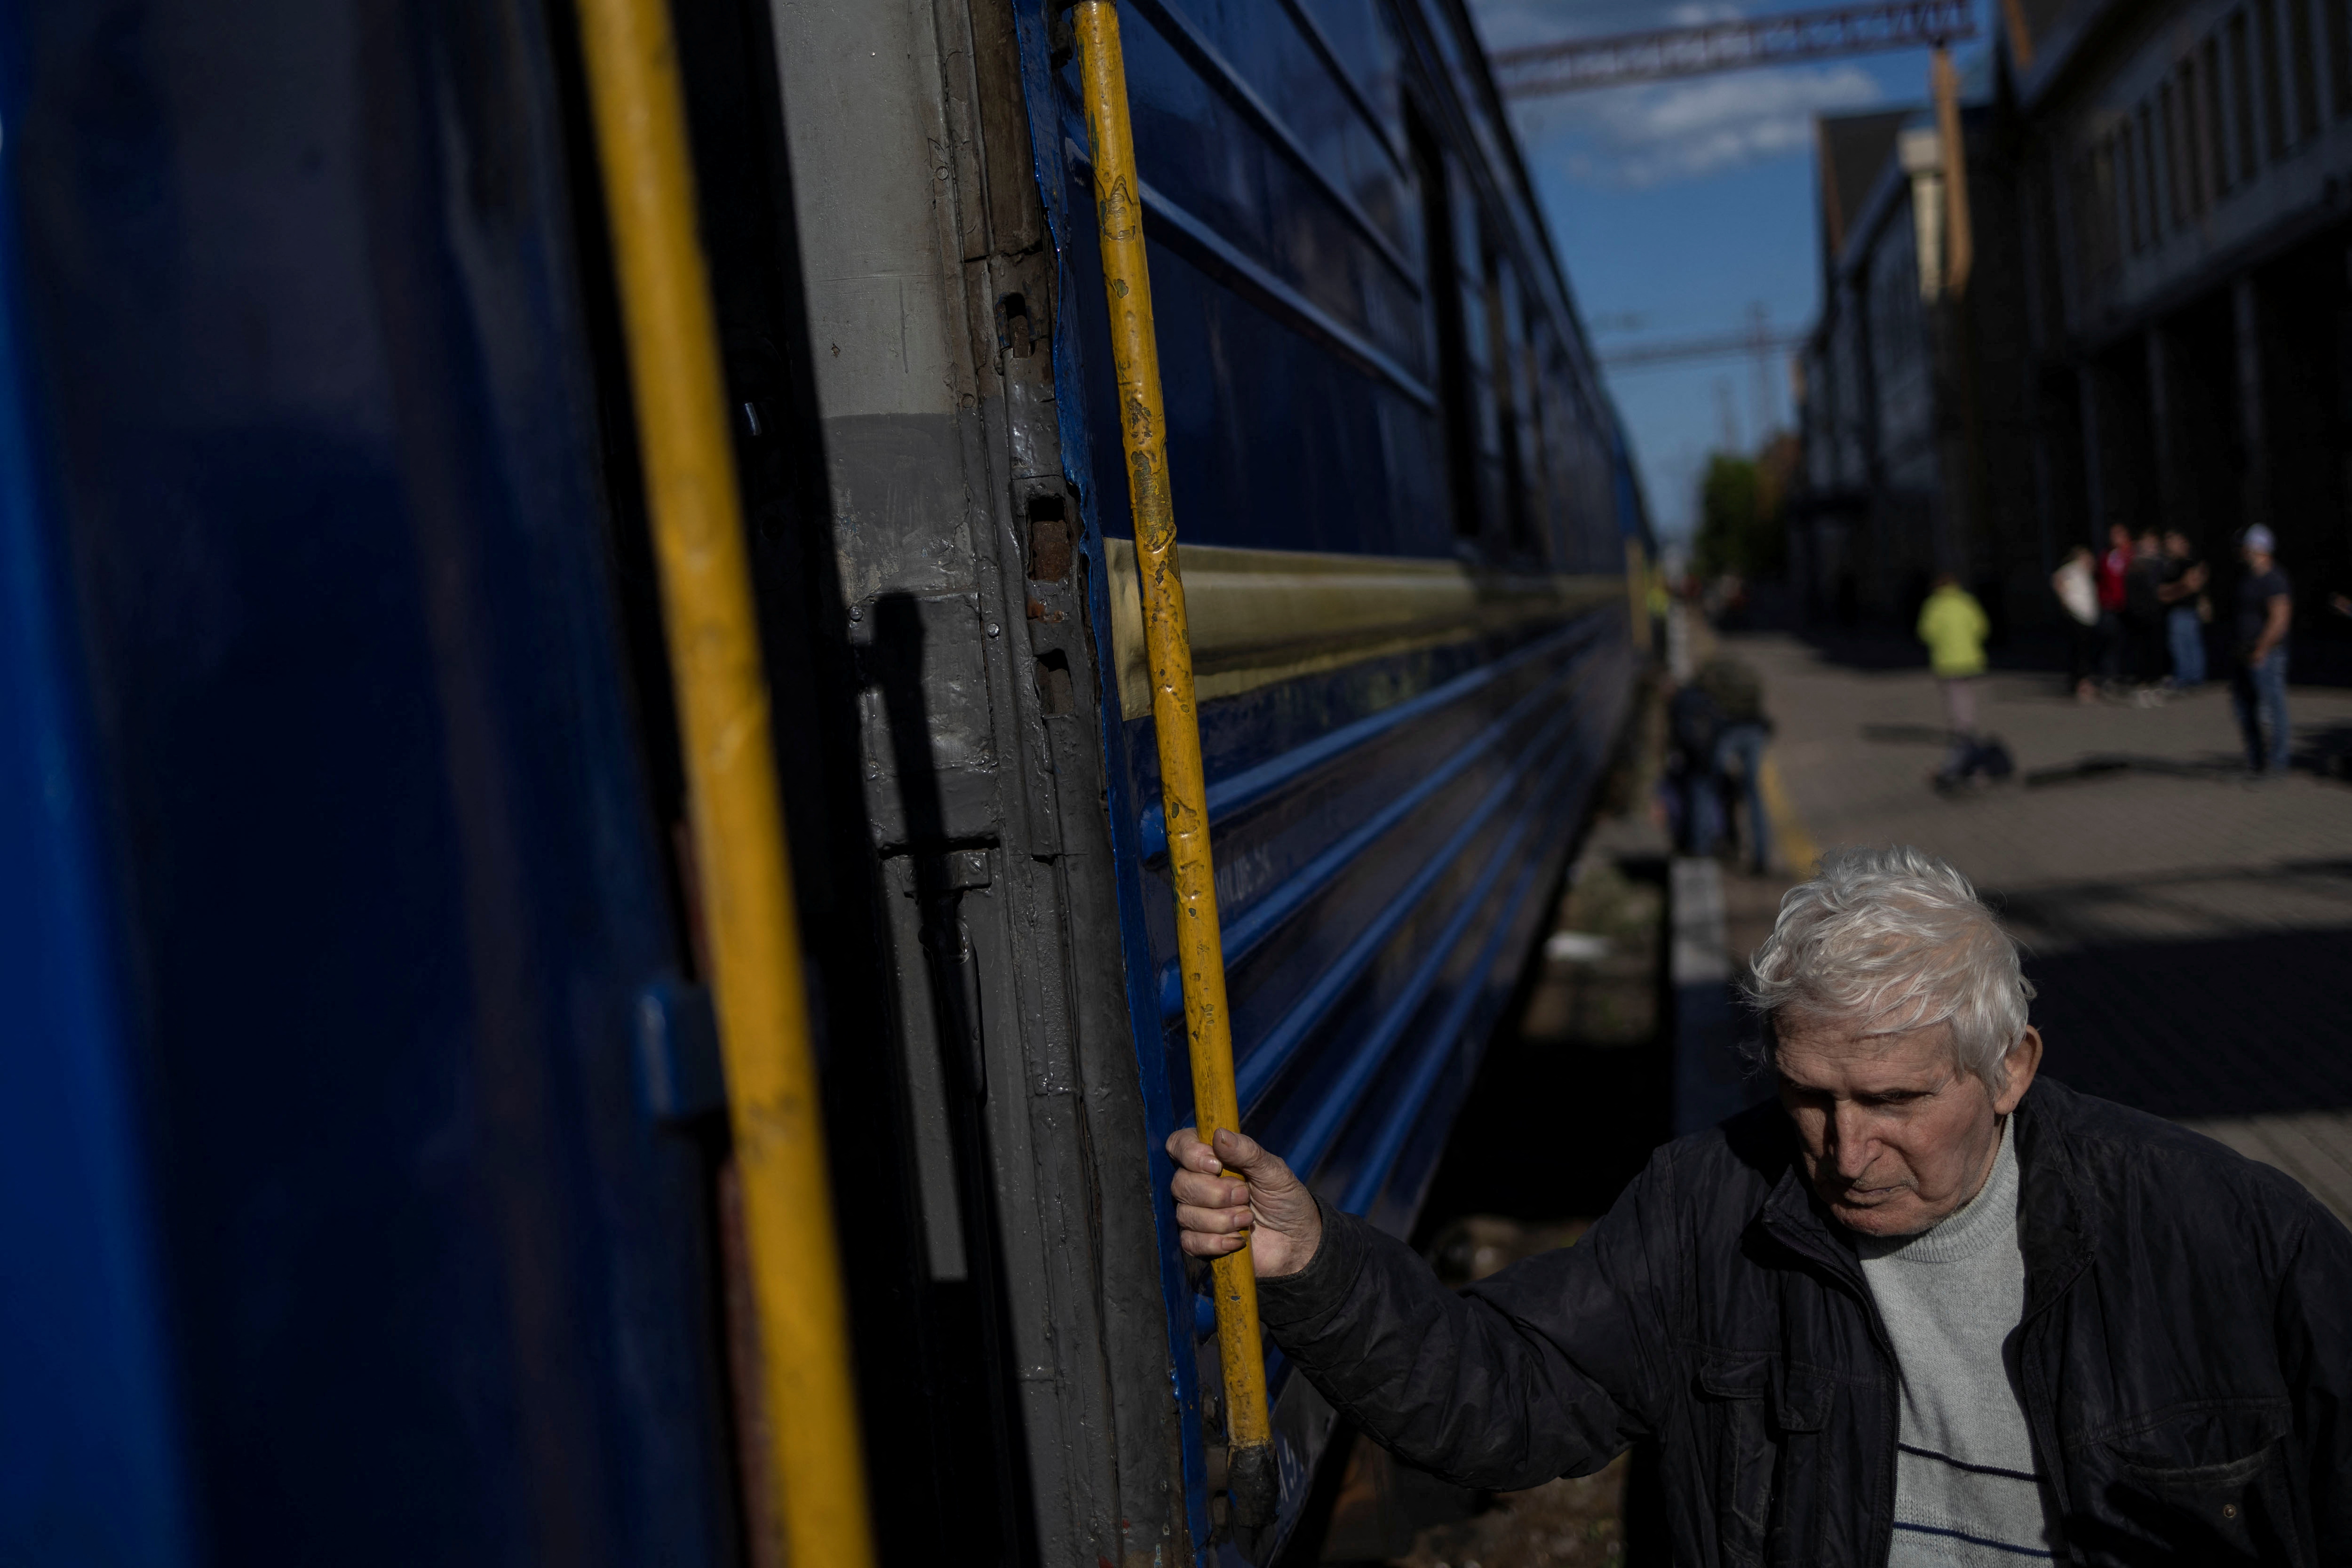 A local resident boards a train as he evacuate from war-affected areas of eastern Ukraine, amid Russia's invasion of the country, in Pokrovsk, Donetsk region, Ukraine